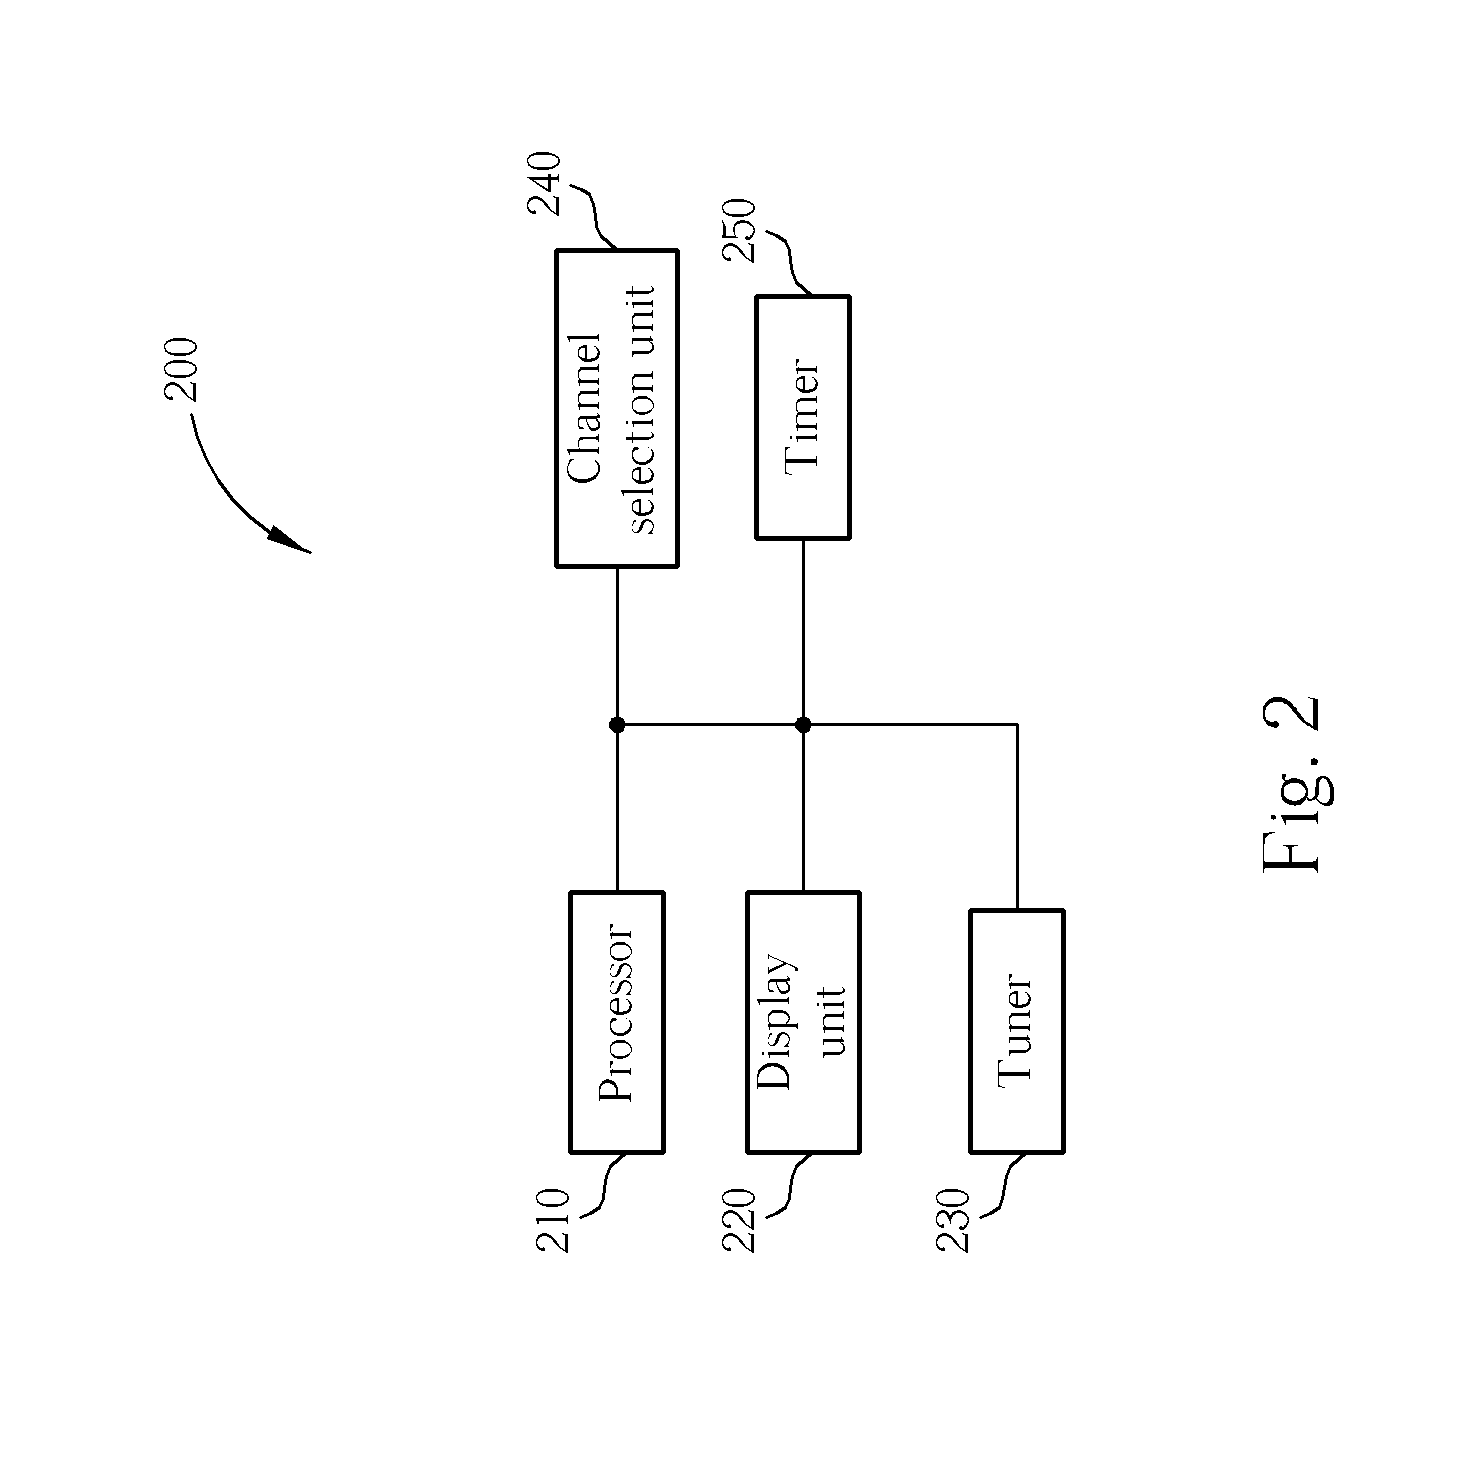 Method of Quickly Selecting a Television Channel and Related Video Device